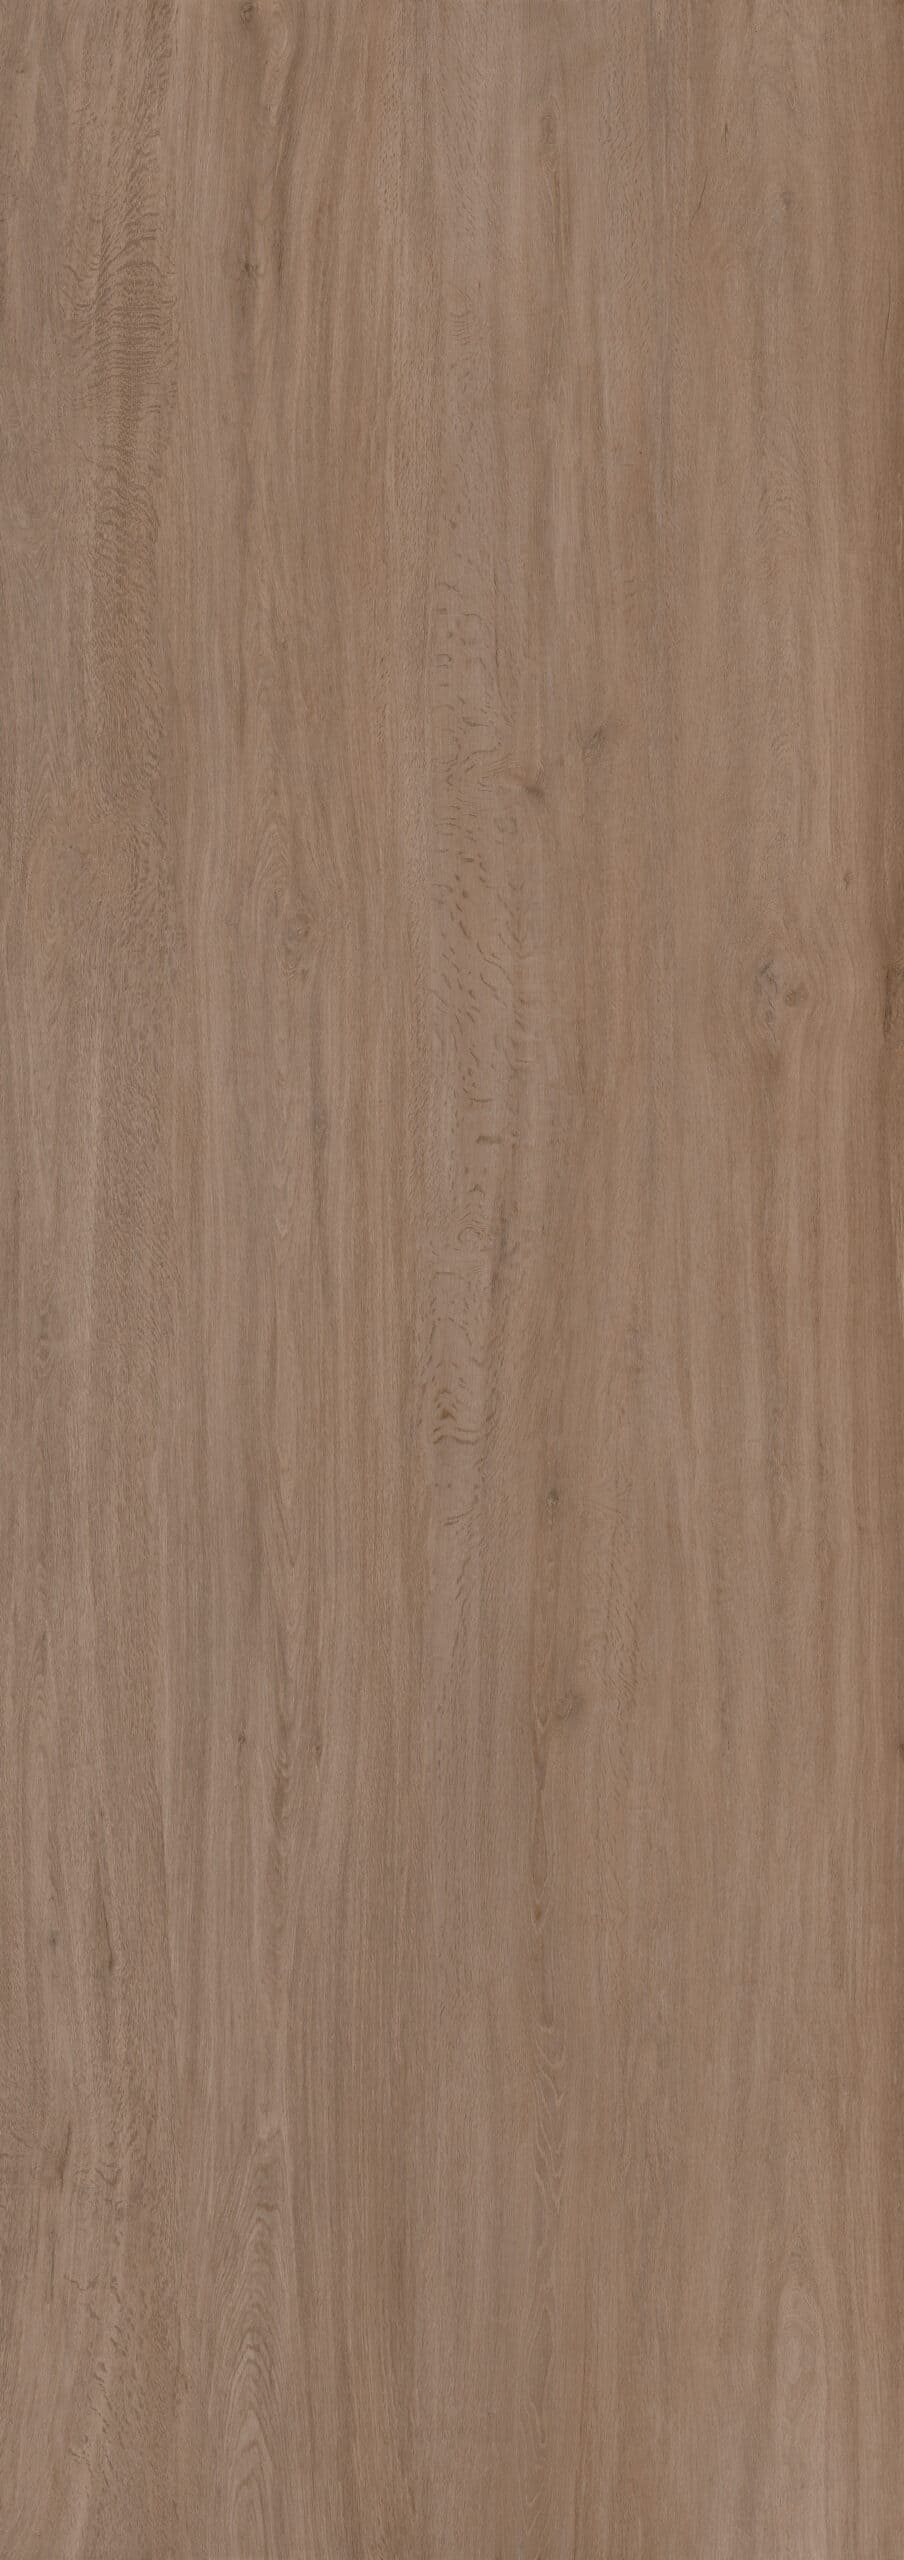 Wood Rovere F1 scaled 1 1